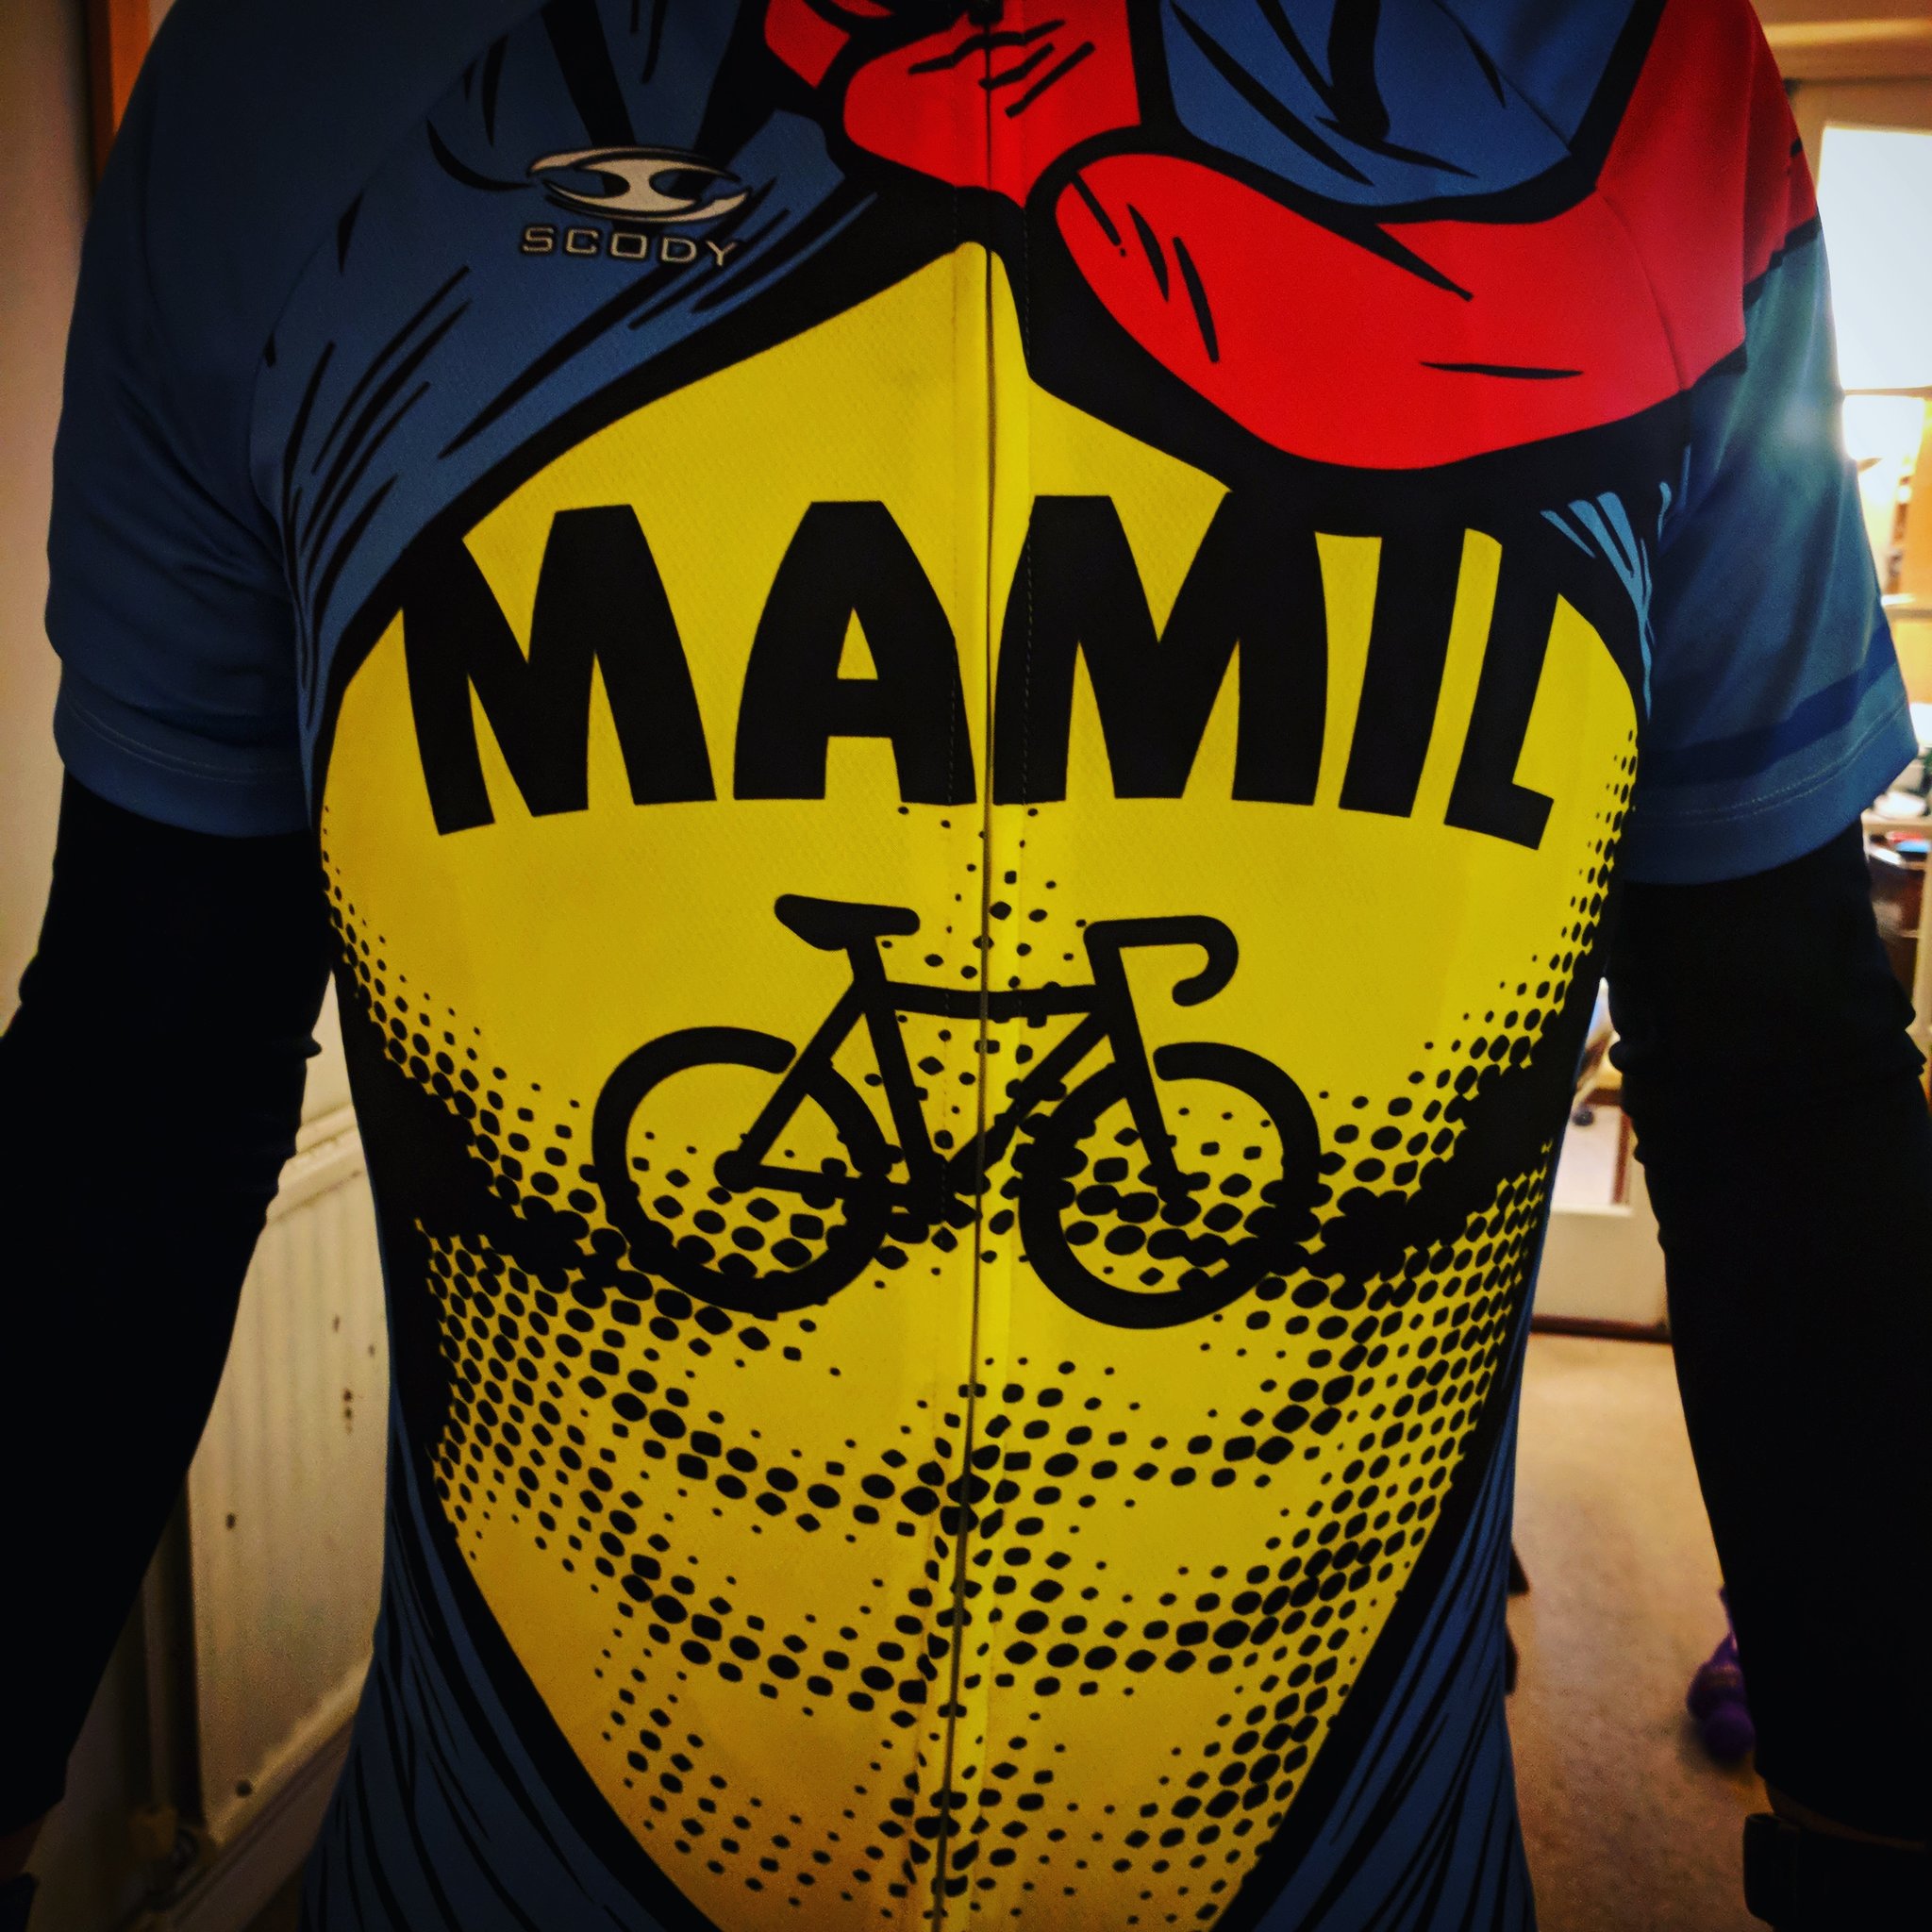 The MAMIL (Middle Aged Man In Lycra 